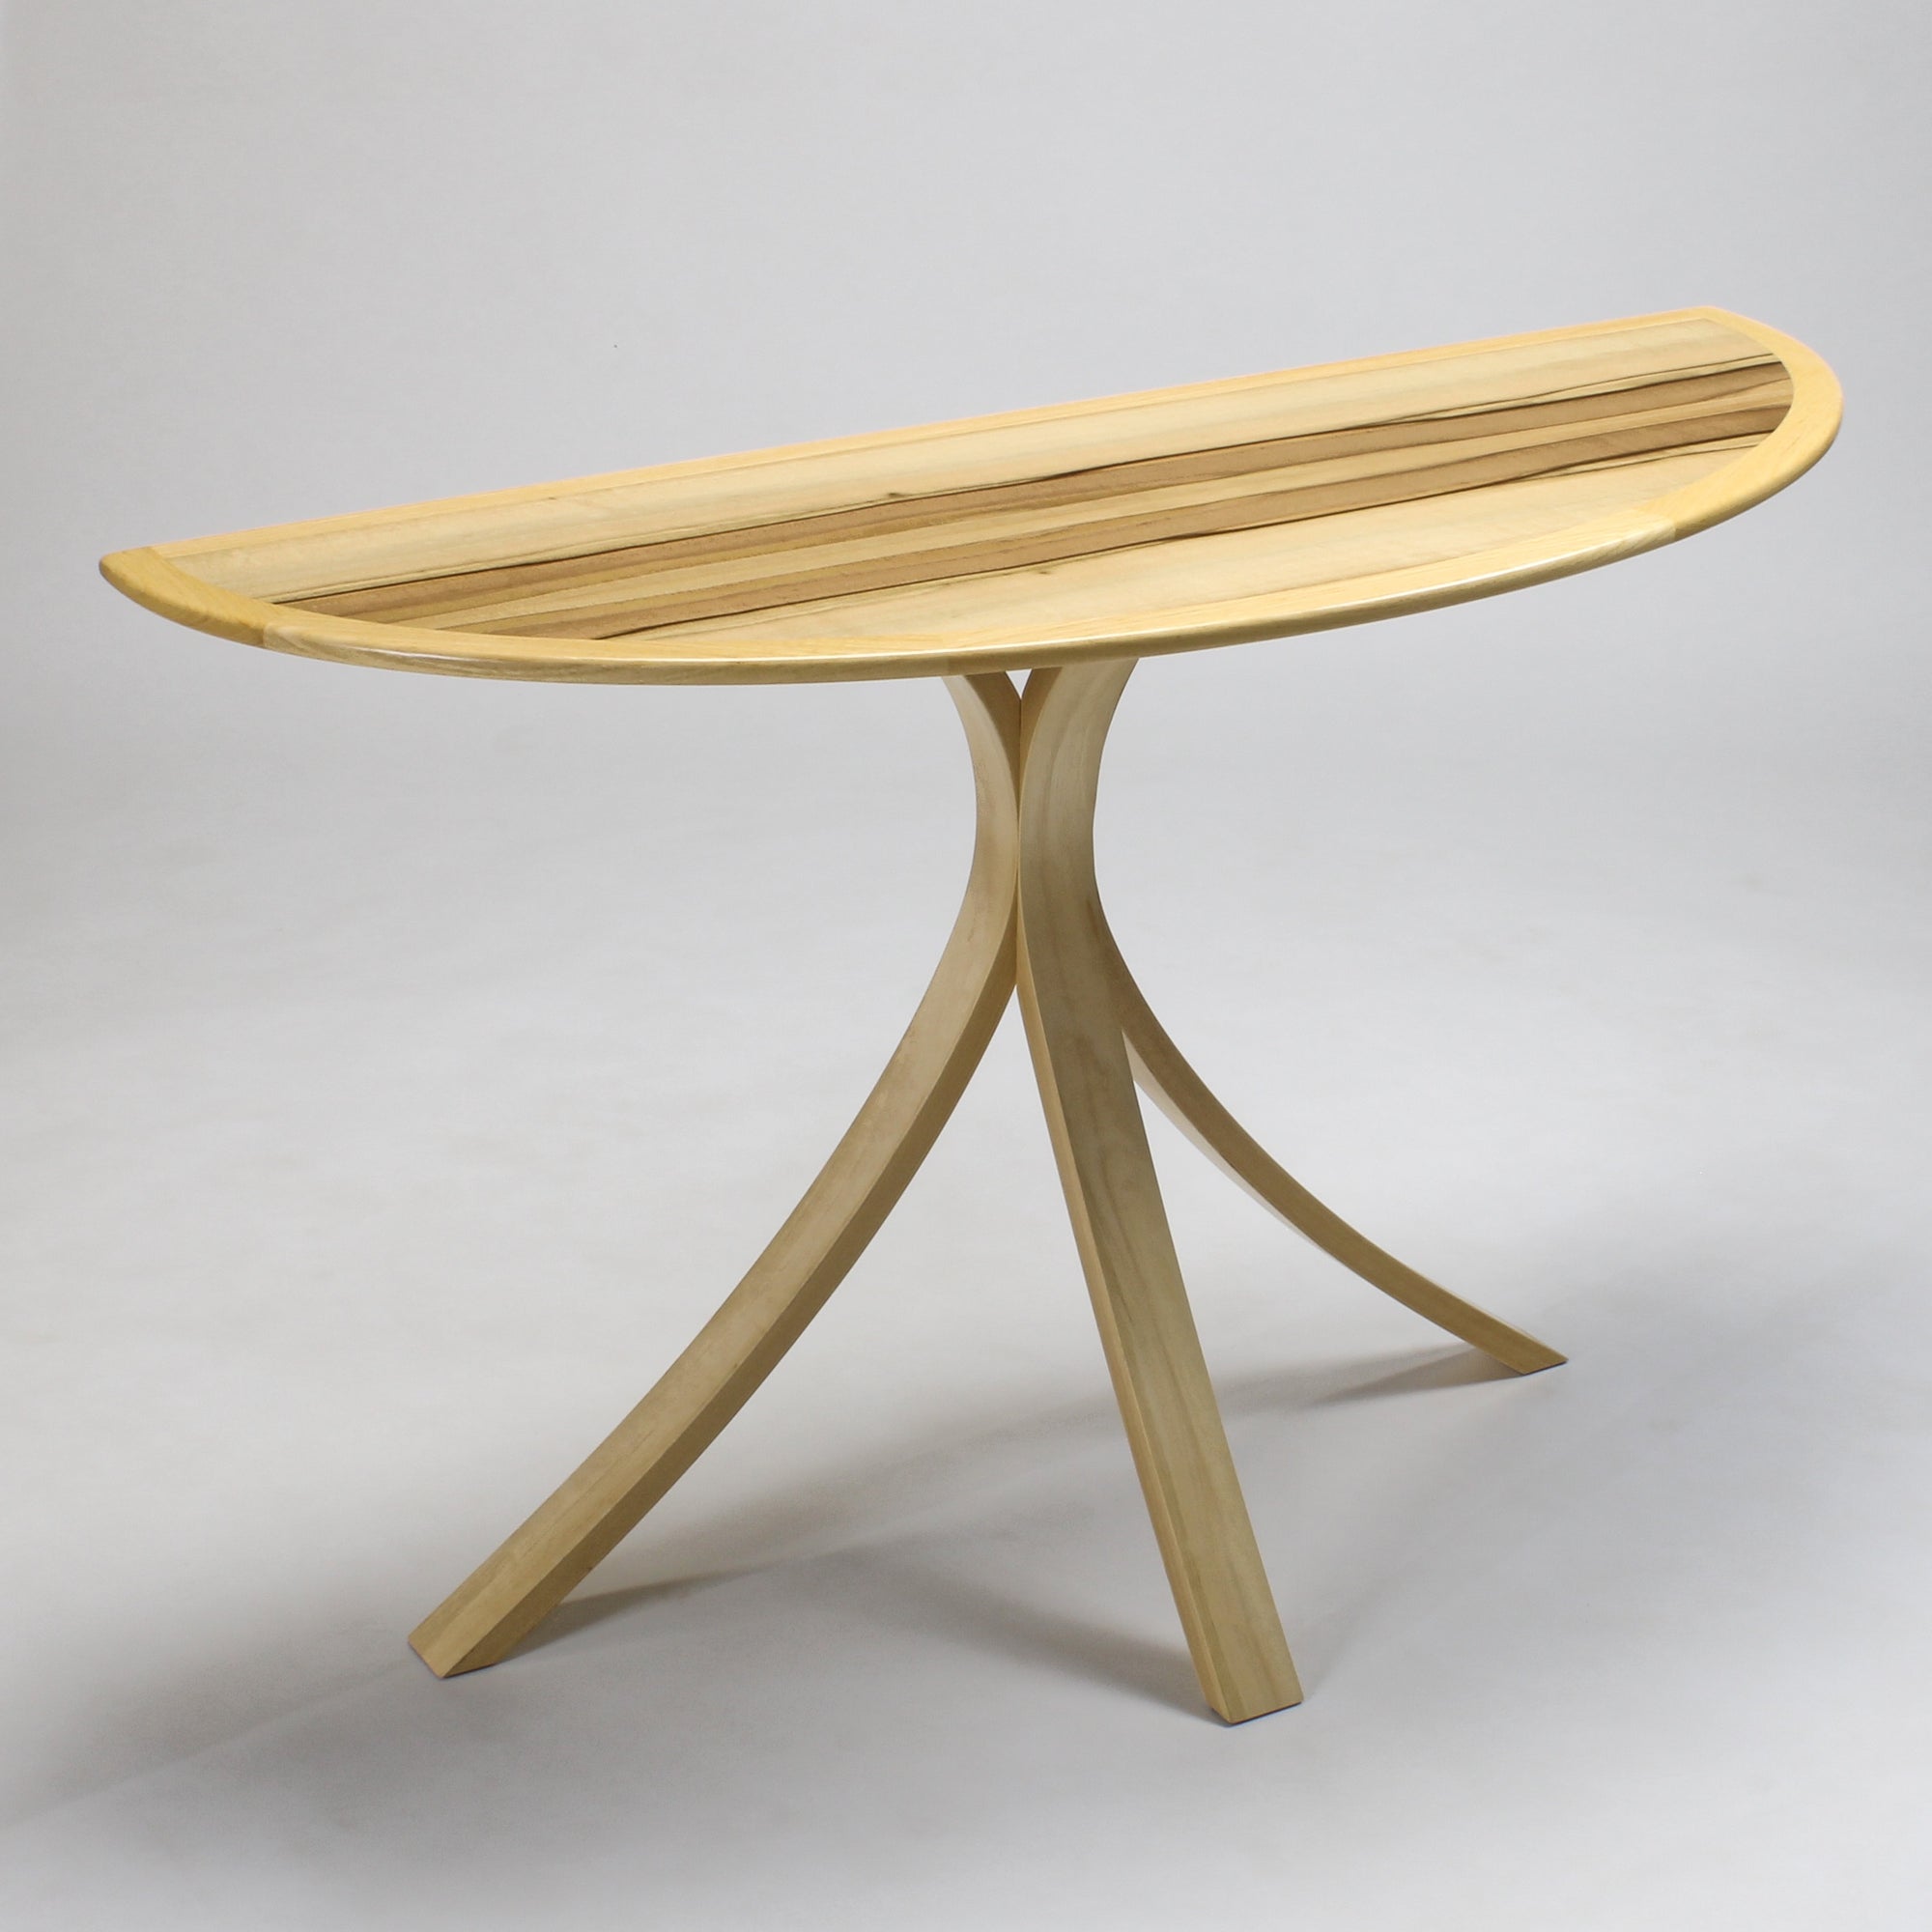 A sassafras hall table with curved top and tripod leg structure